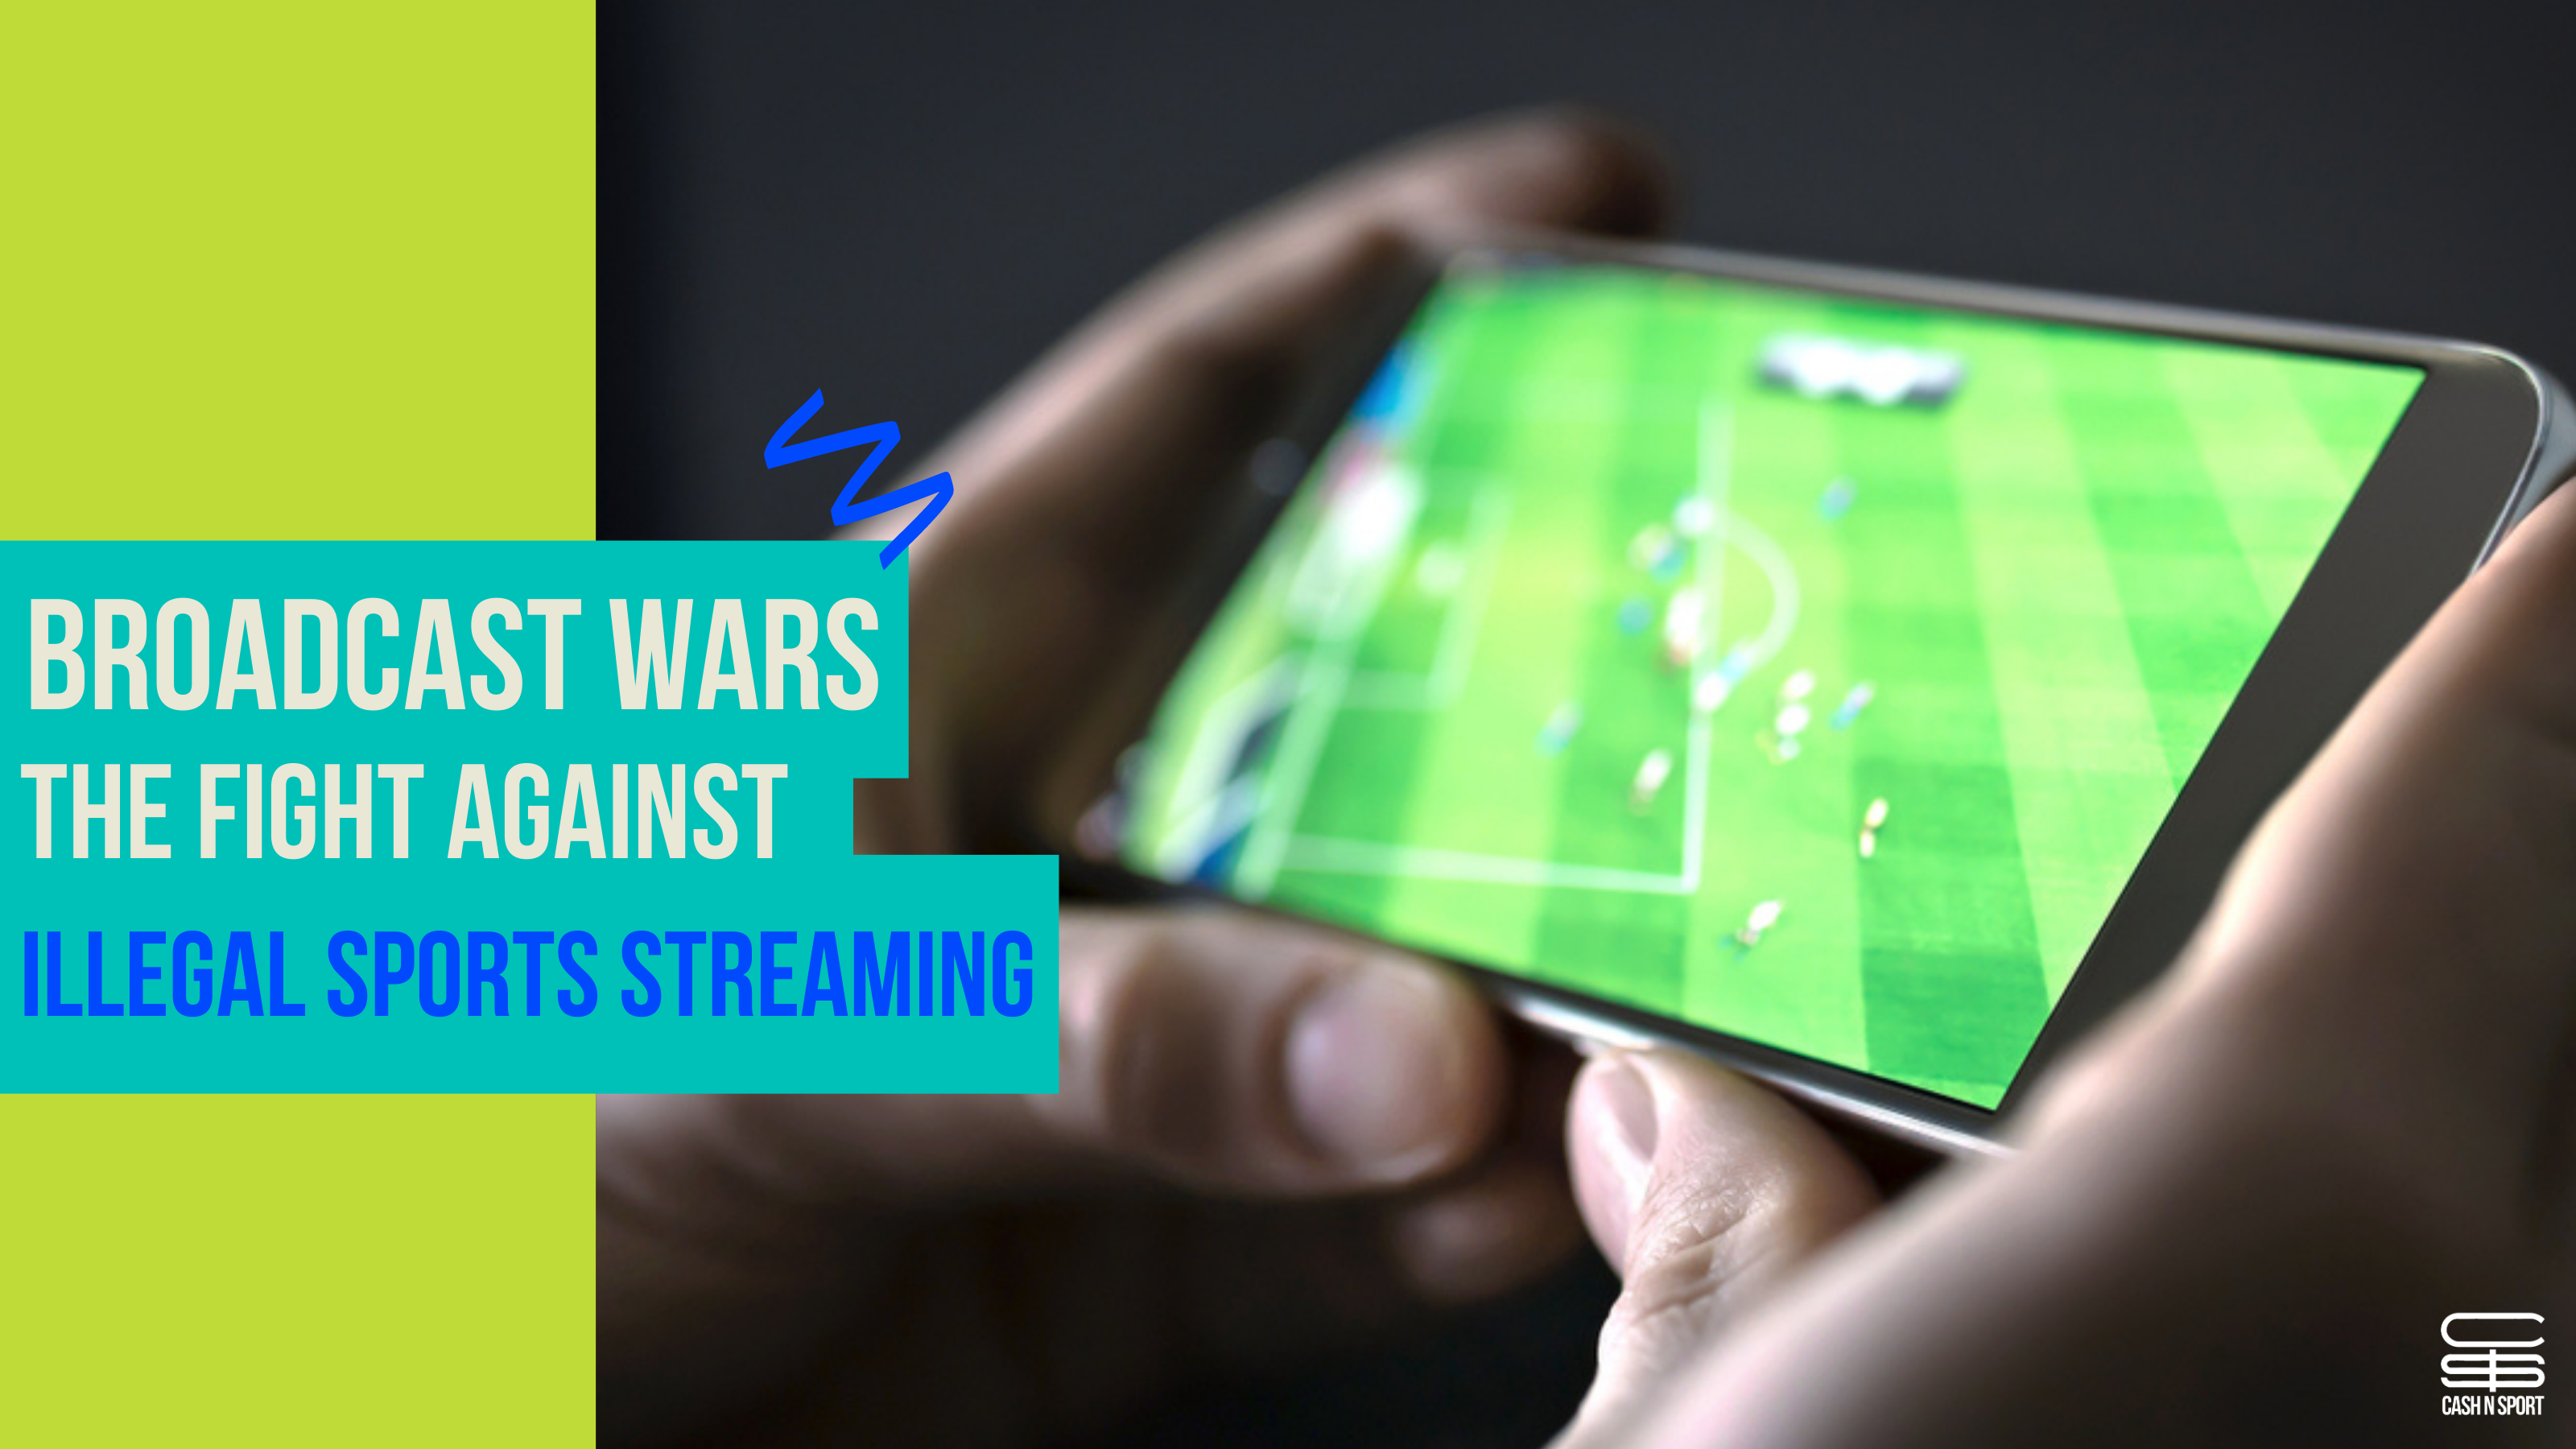 Broadcast Wars, The Fight Against Illegal Sports Streaming